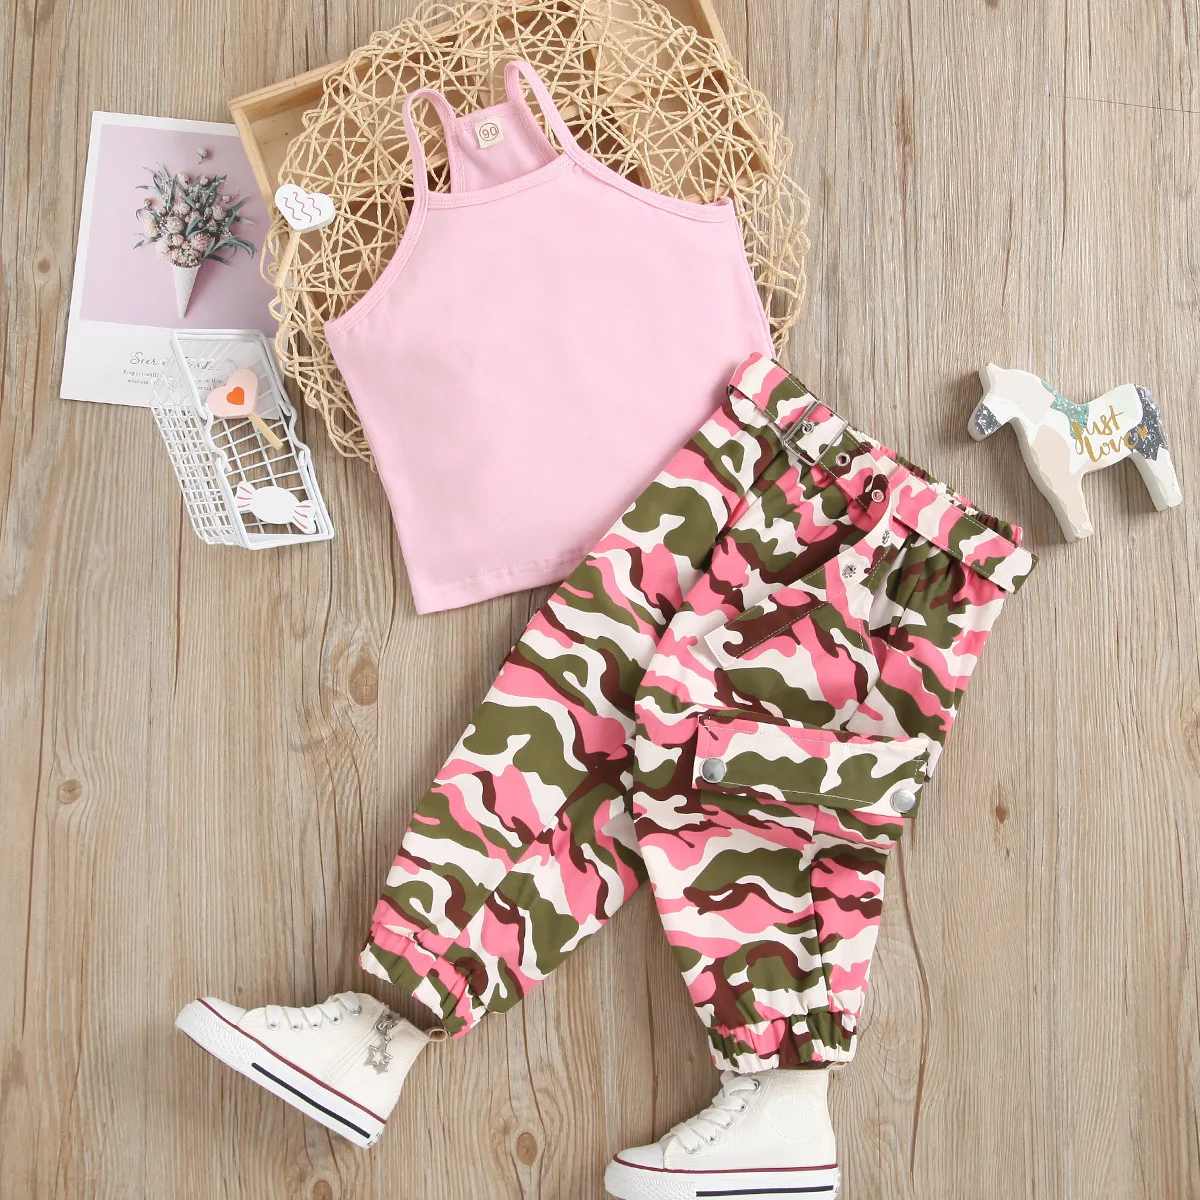 Wholesale toddler girls clothes casual sleeveless shirt tops+camouflage trousers boutique two piece kids outfits